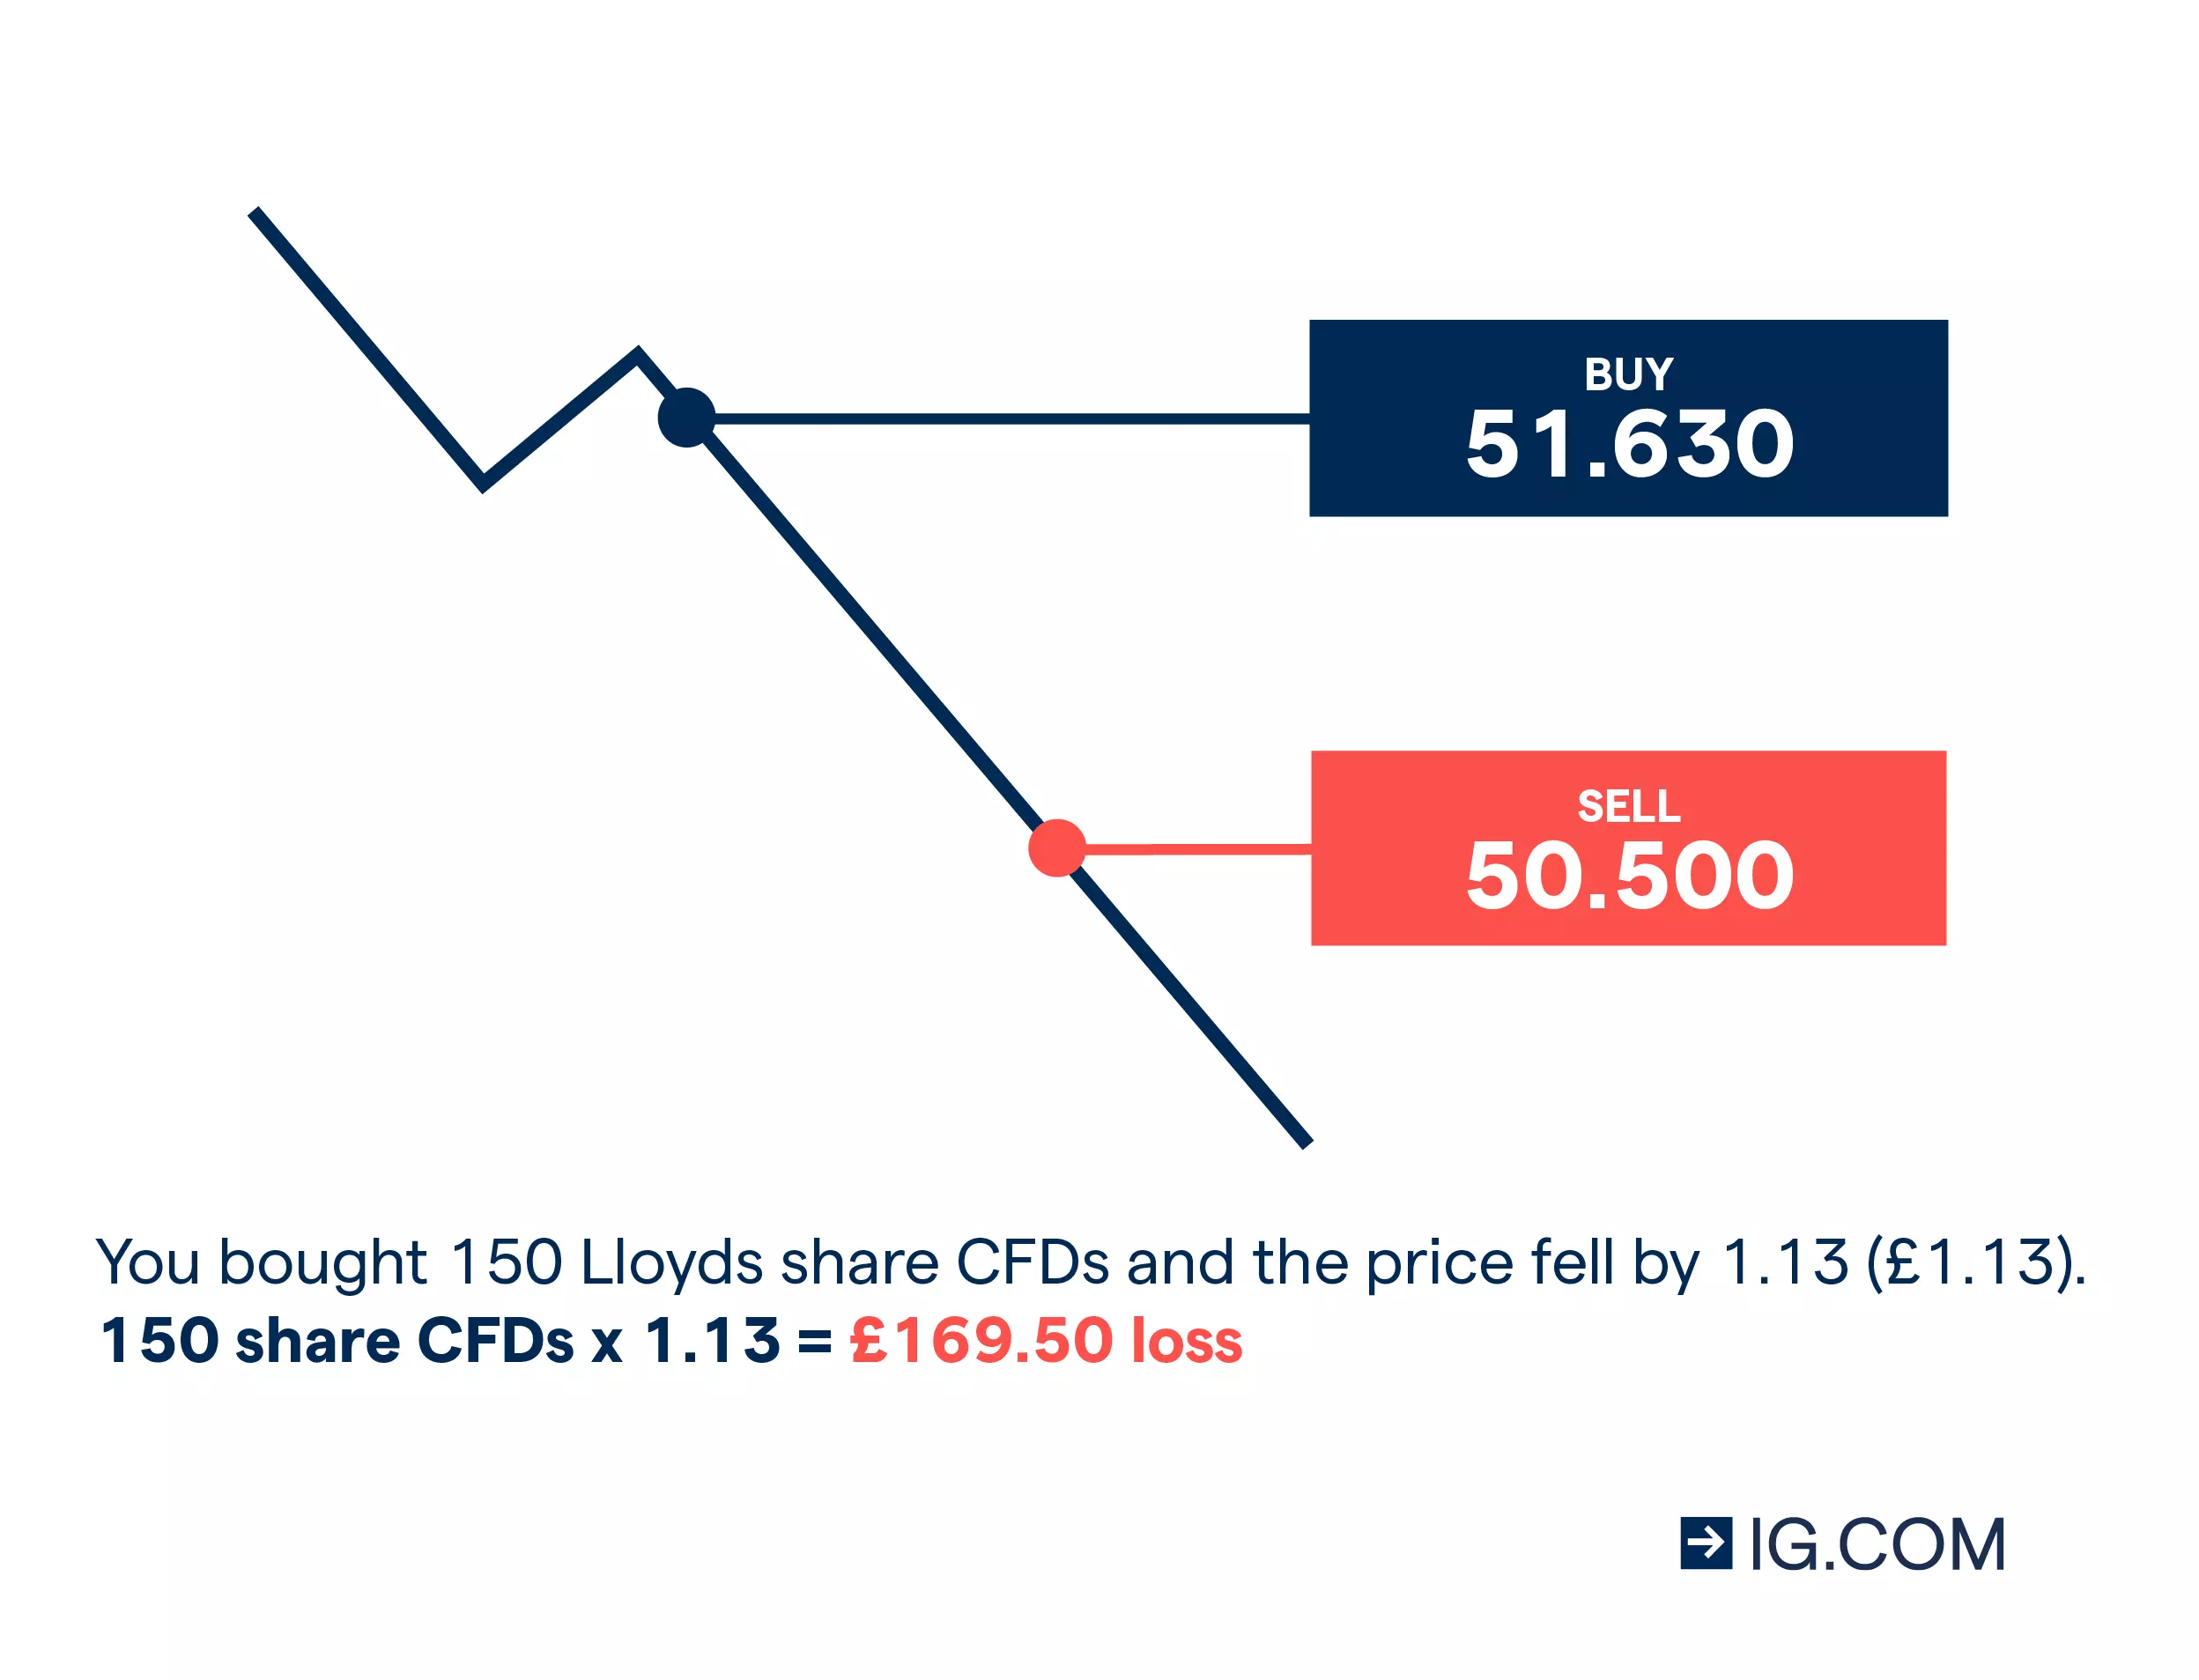 CFD trading example: Lloyds loss example